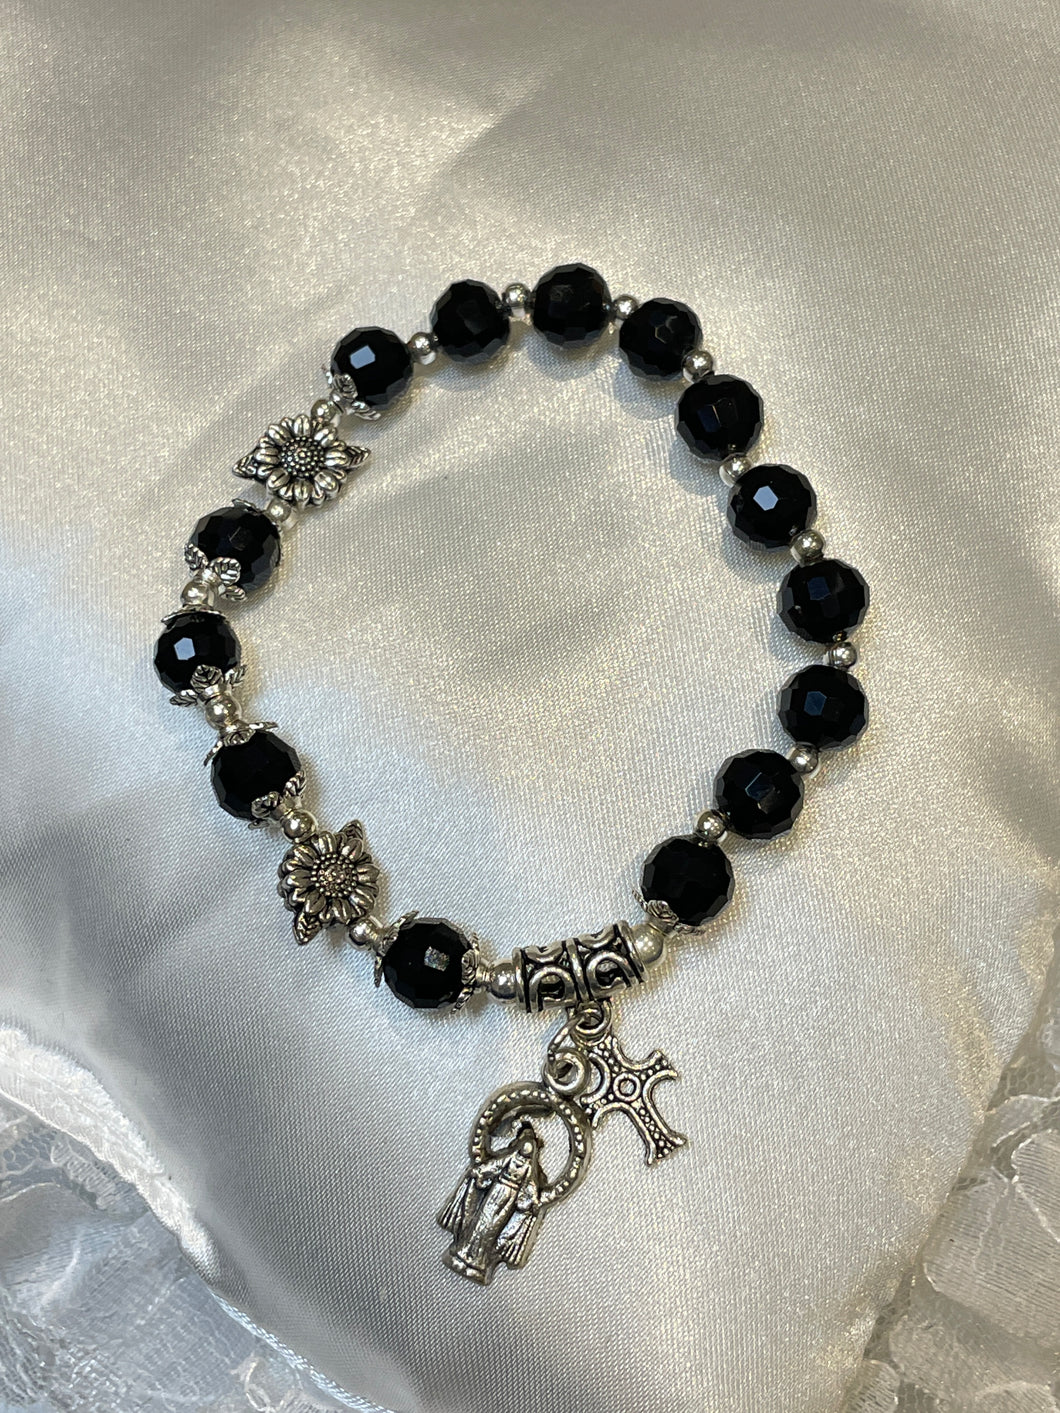 Black Gemstone Rosary Bracelet with Our Lady of Grace and Cross Charms